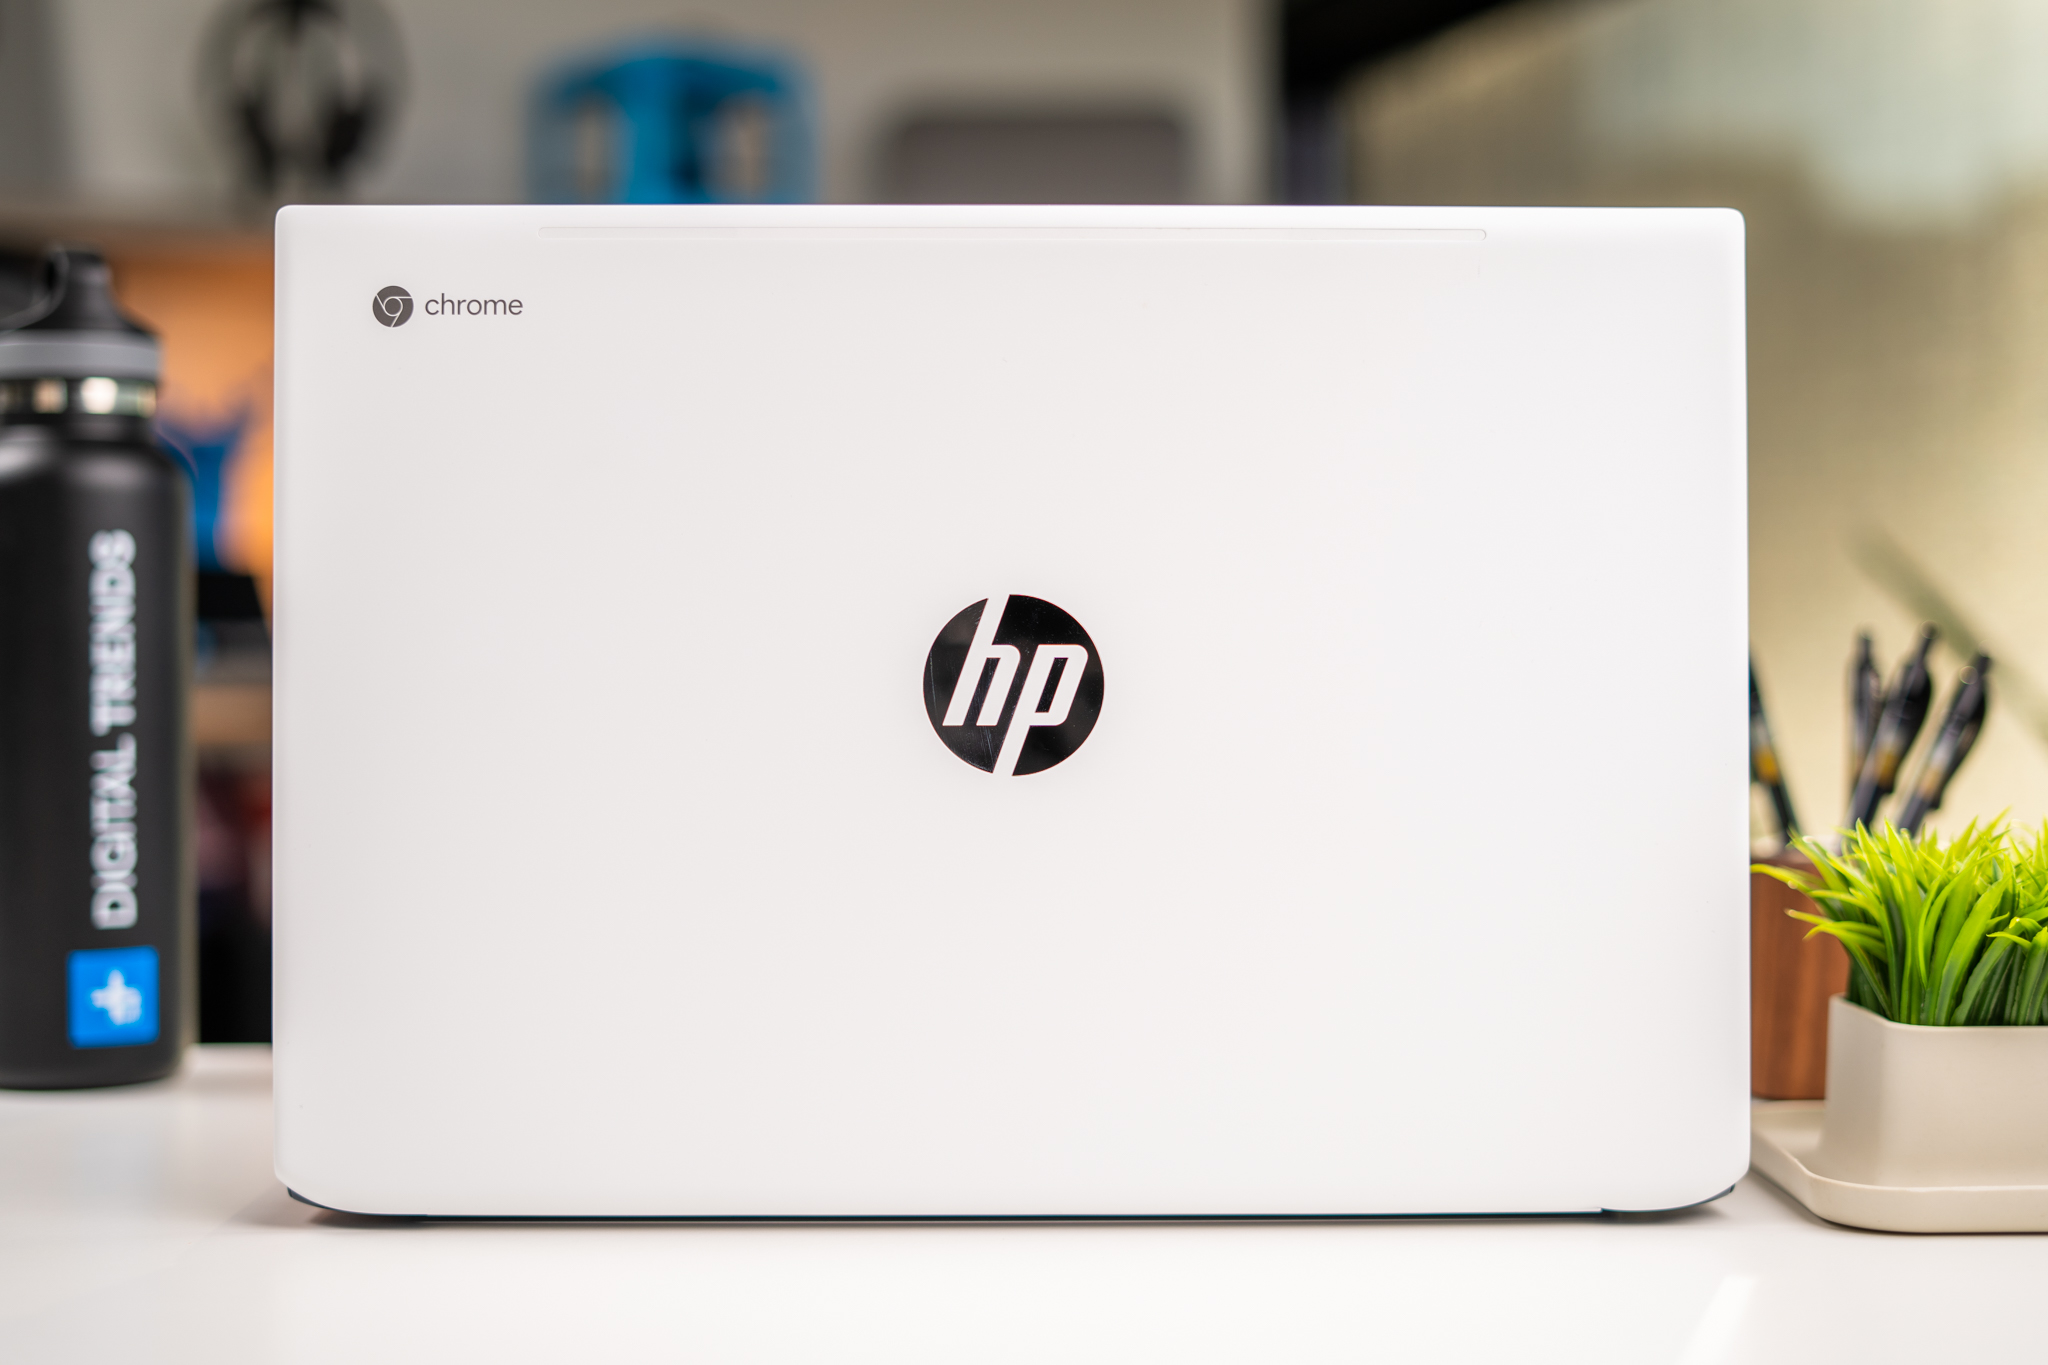 HP Chromebook 15 Review: The Bread and Butter Chromebook